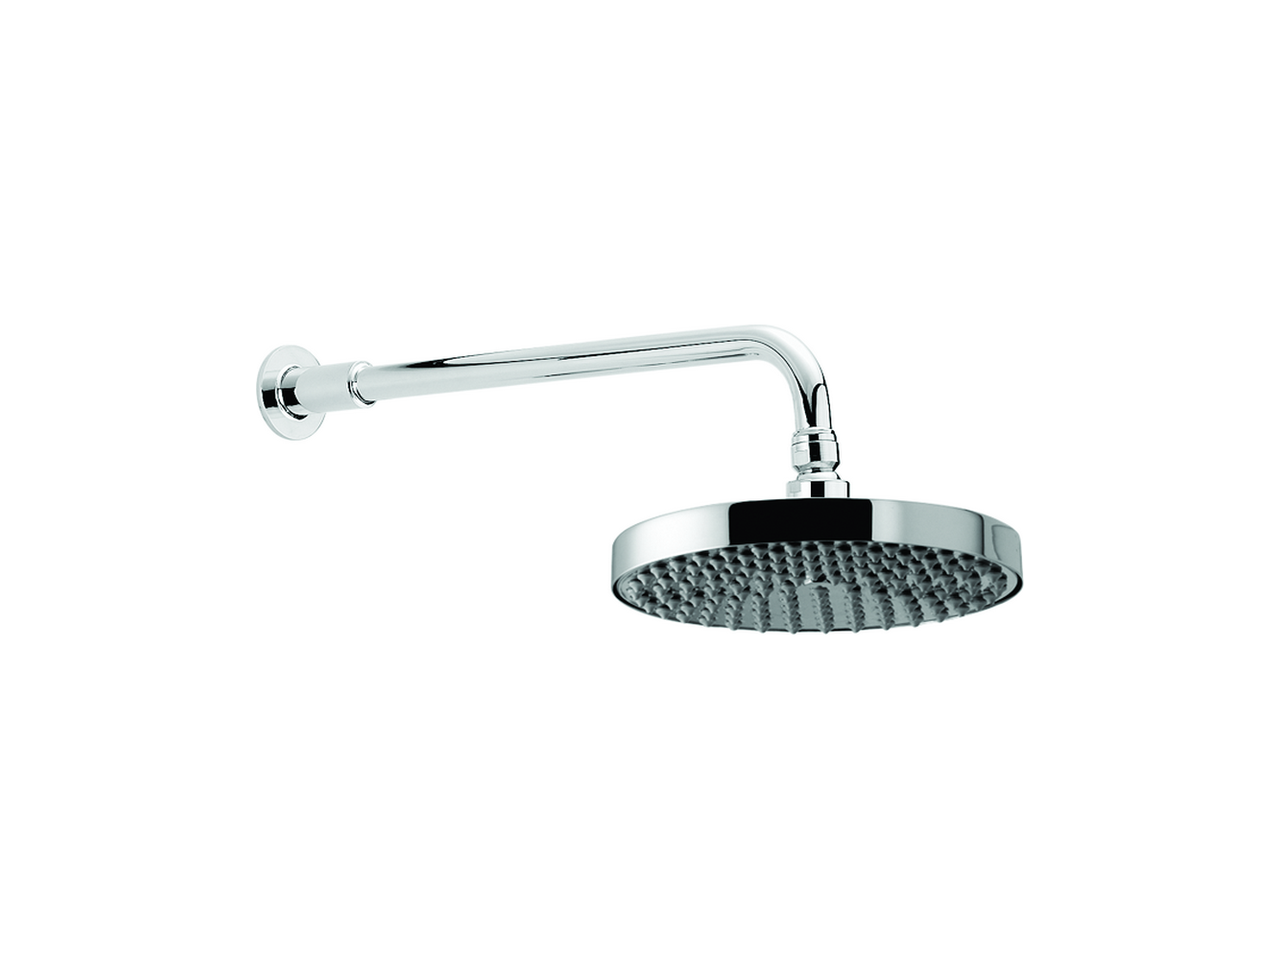 HUBERShower arm with Suite showerhead SHOWER